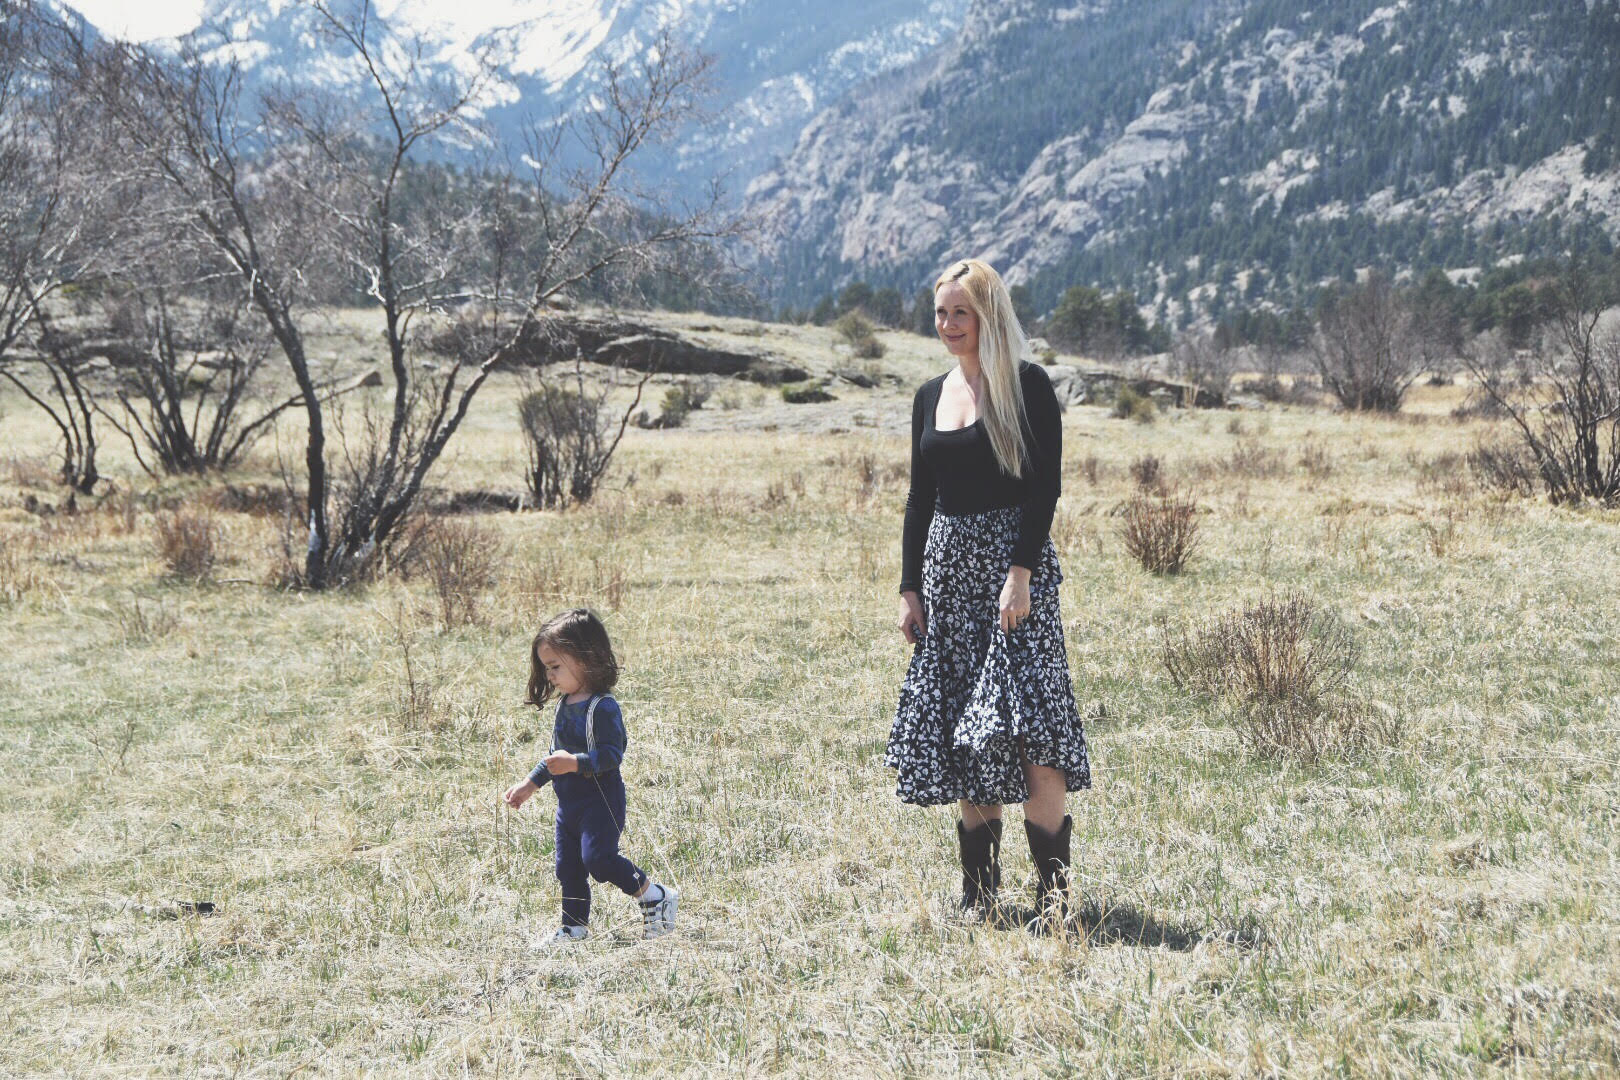 Mama and Child in front of mountains